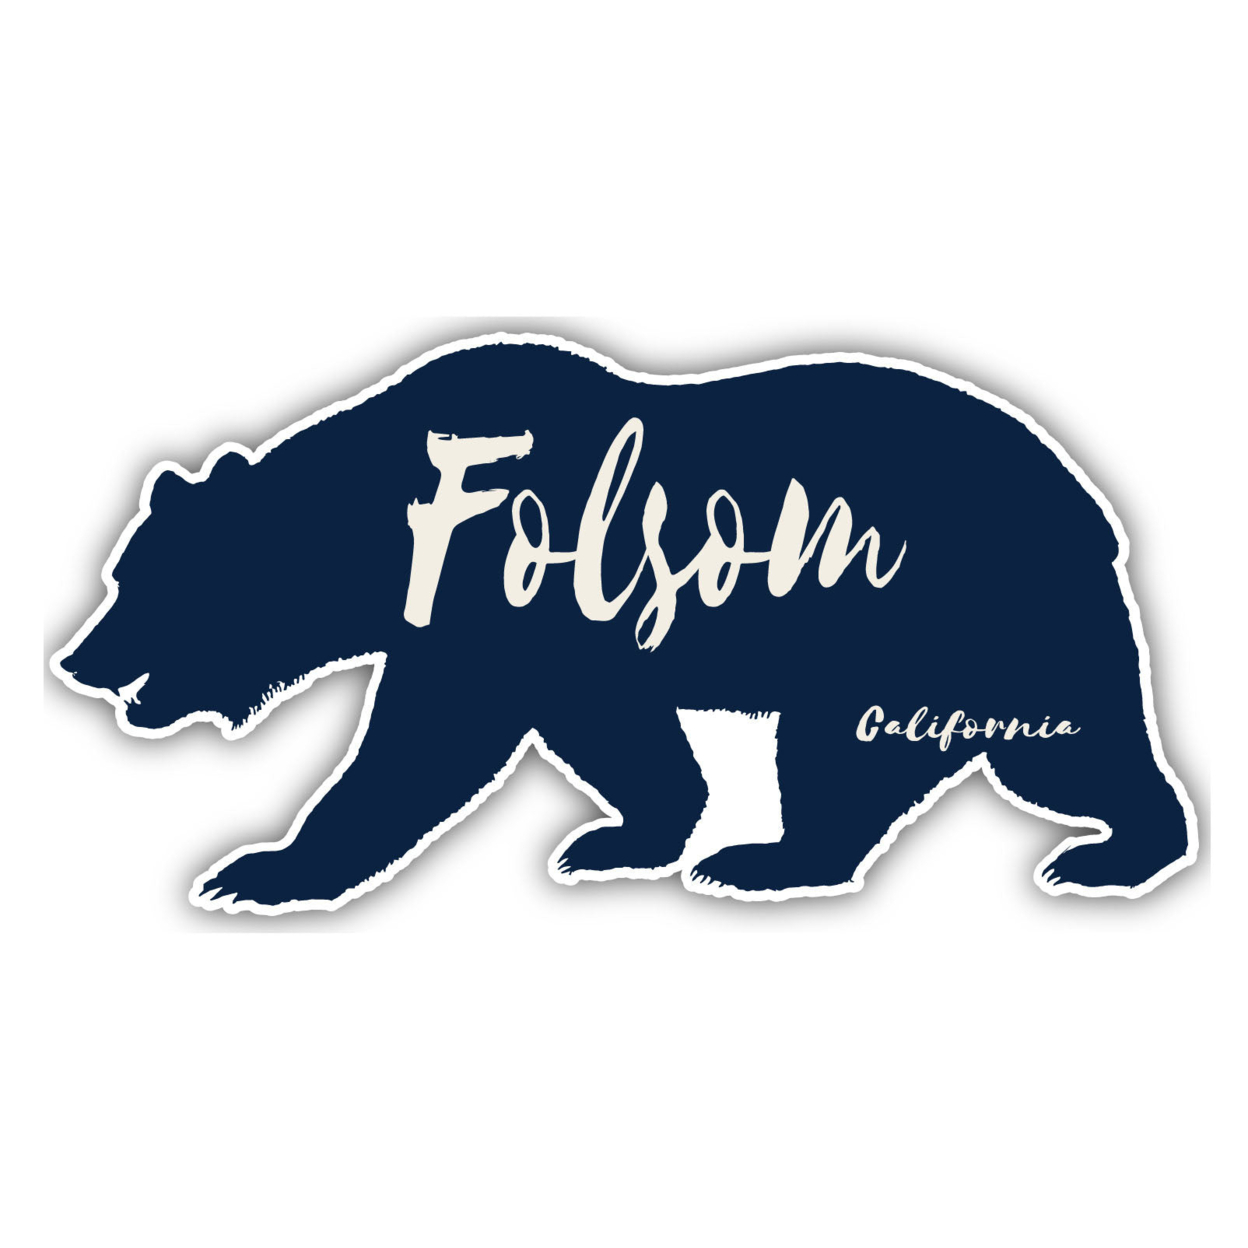 Folsom California Souvenir Decorative Stickers (Choose Theme And Size) - 4-Pack, 8-Inch, Tent